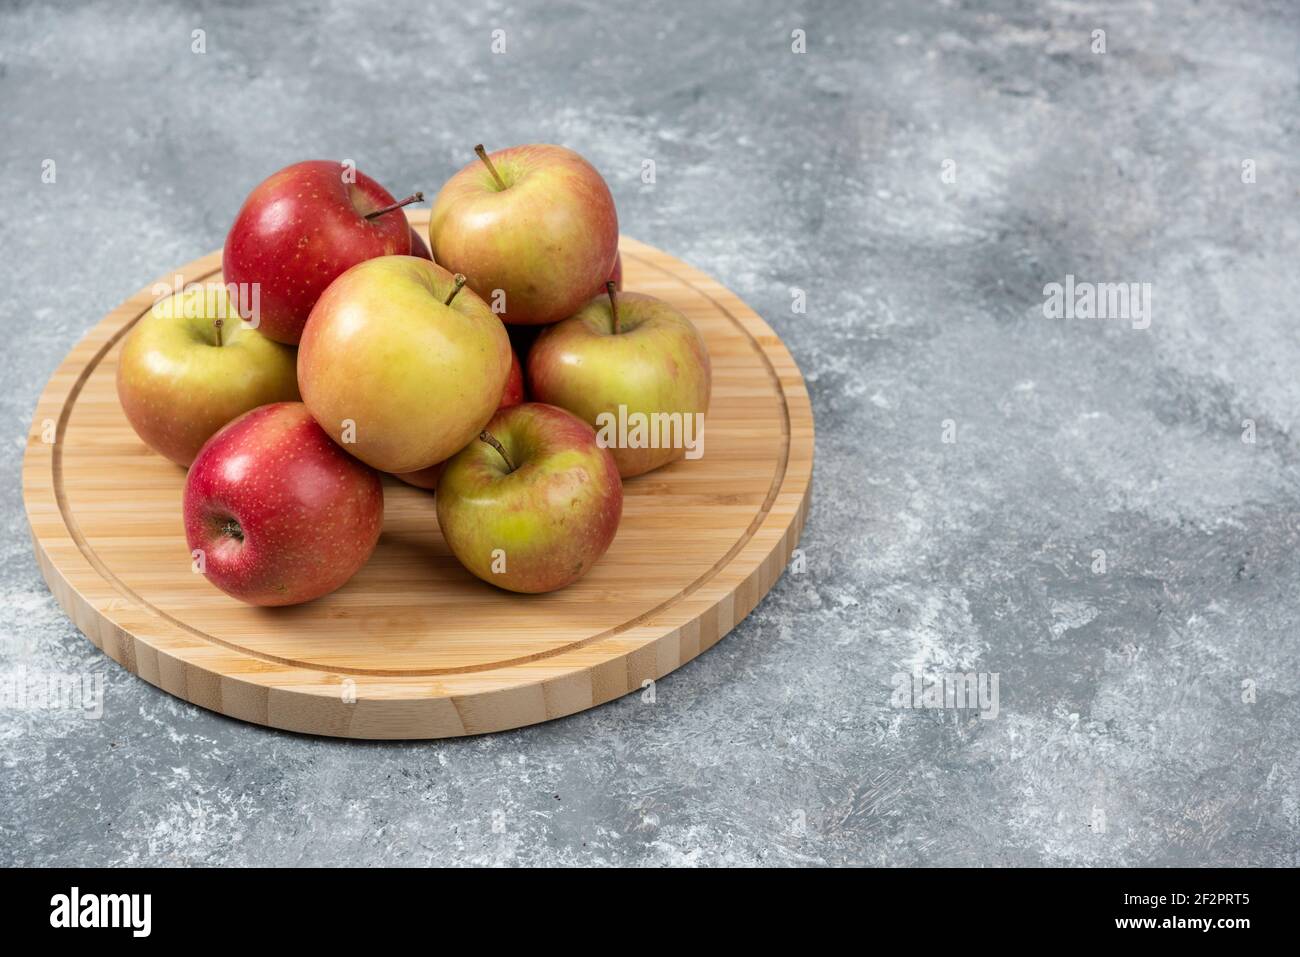 Bunch of fresh ripe apples placed on wooden board Stock Photo